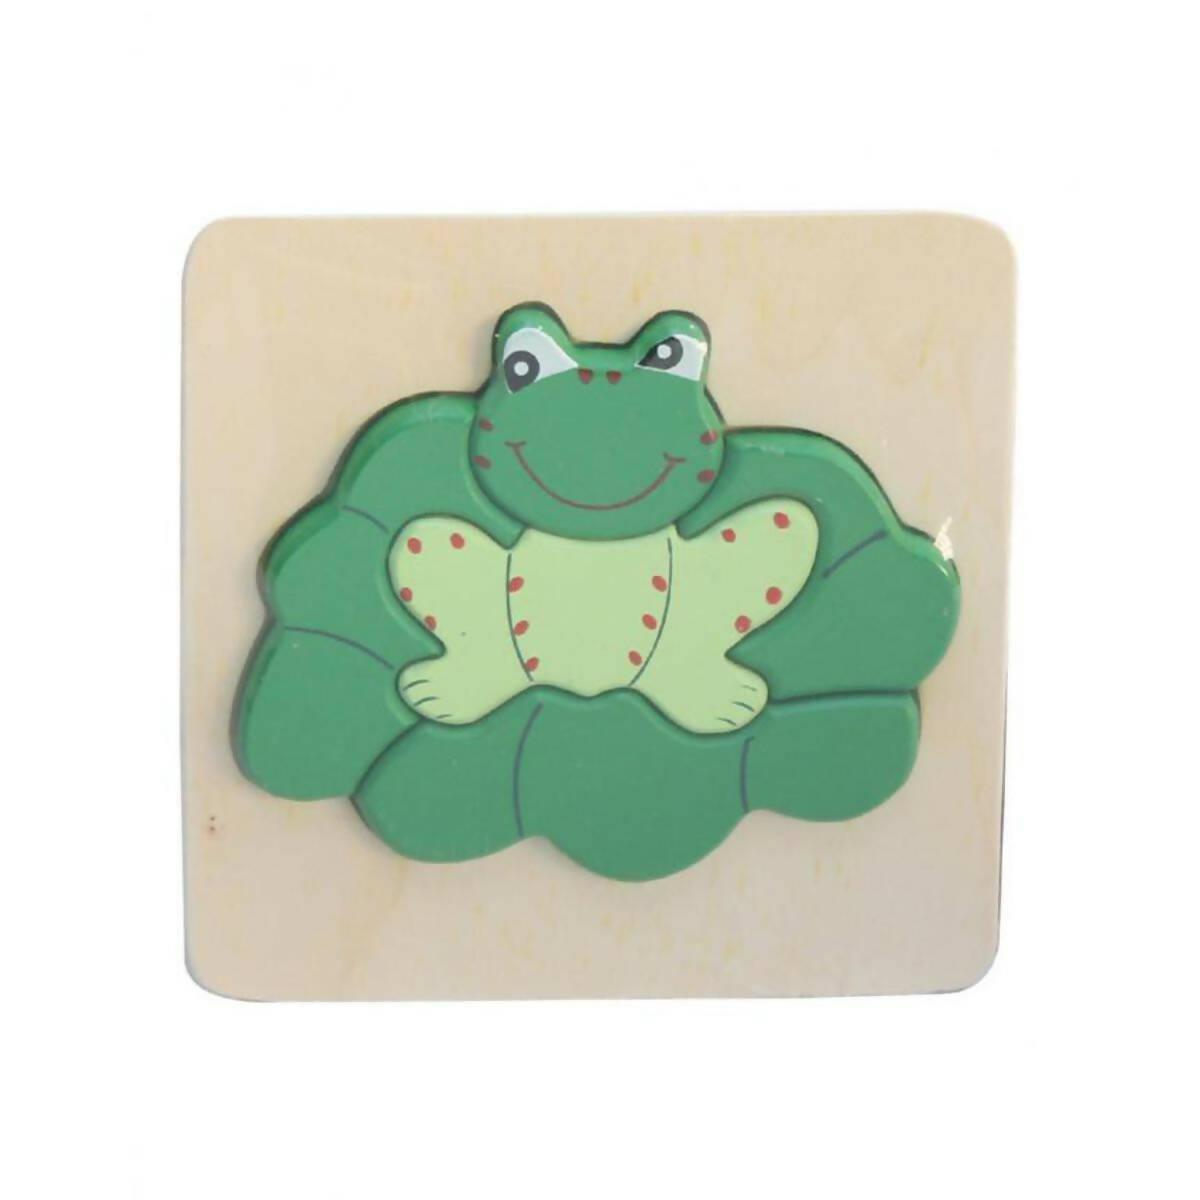 Wooden Puzzle Thick Frog For Kids - Green & Brown - ValueBox